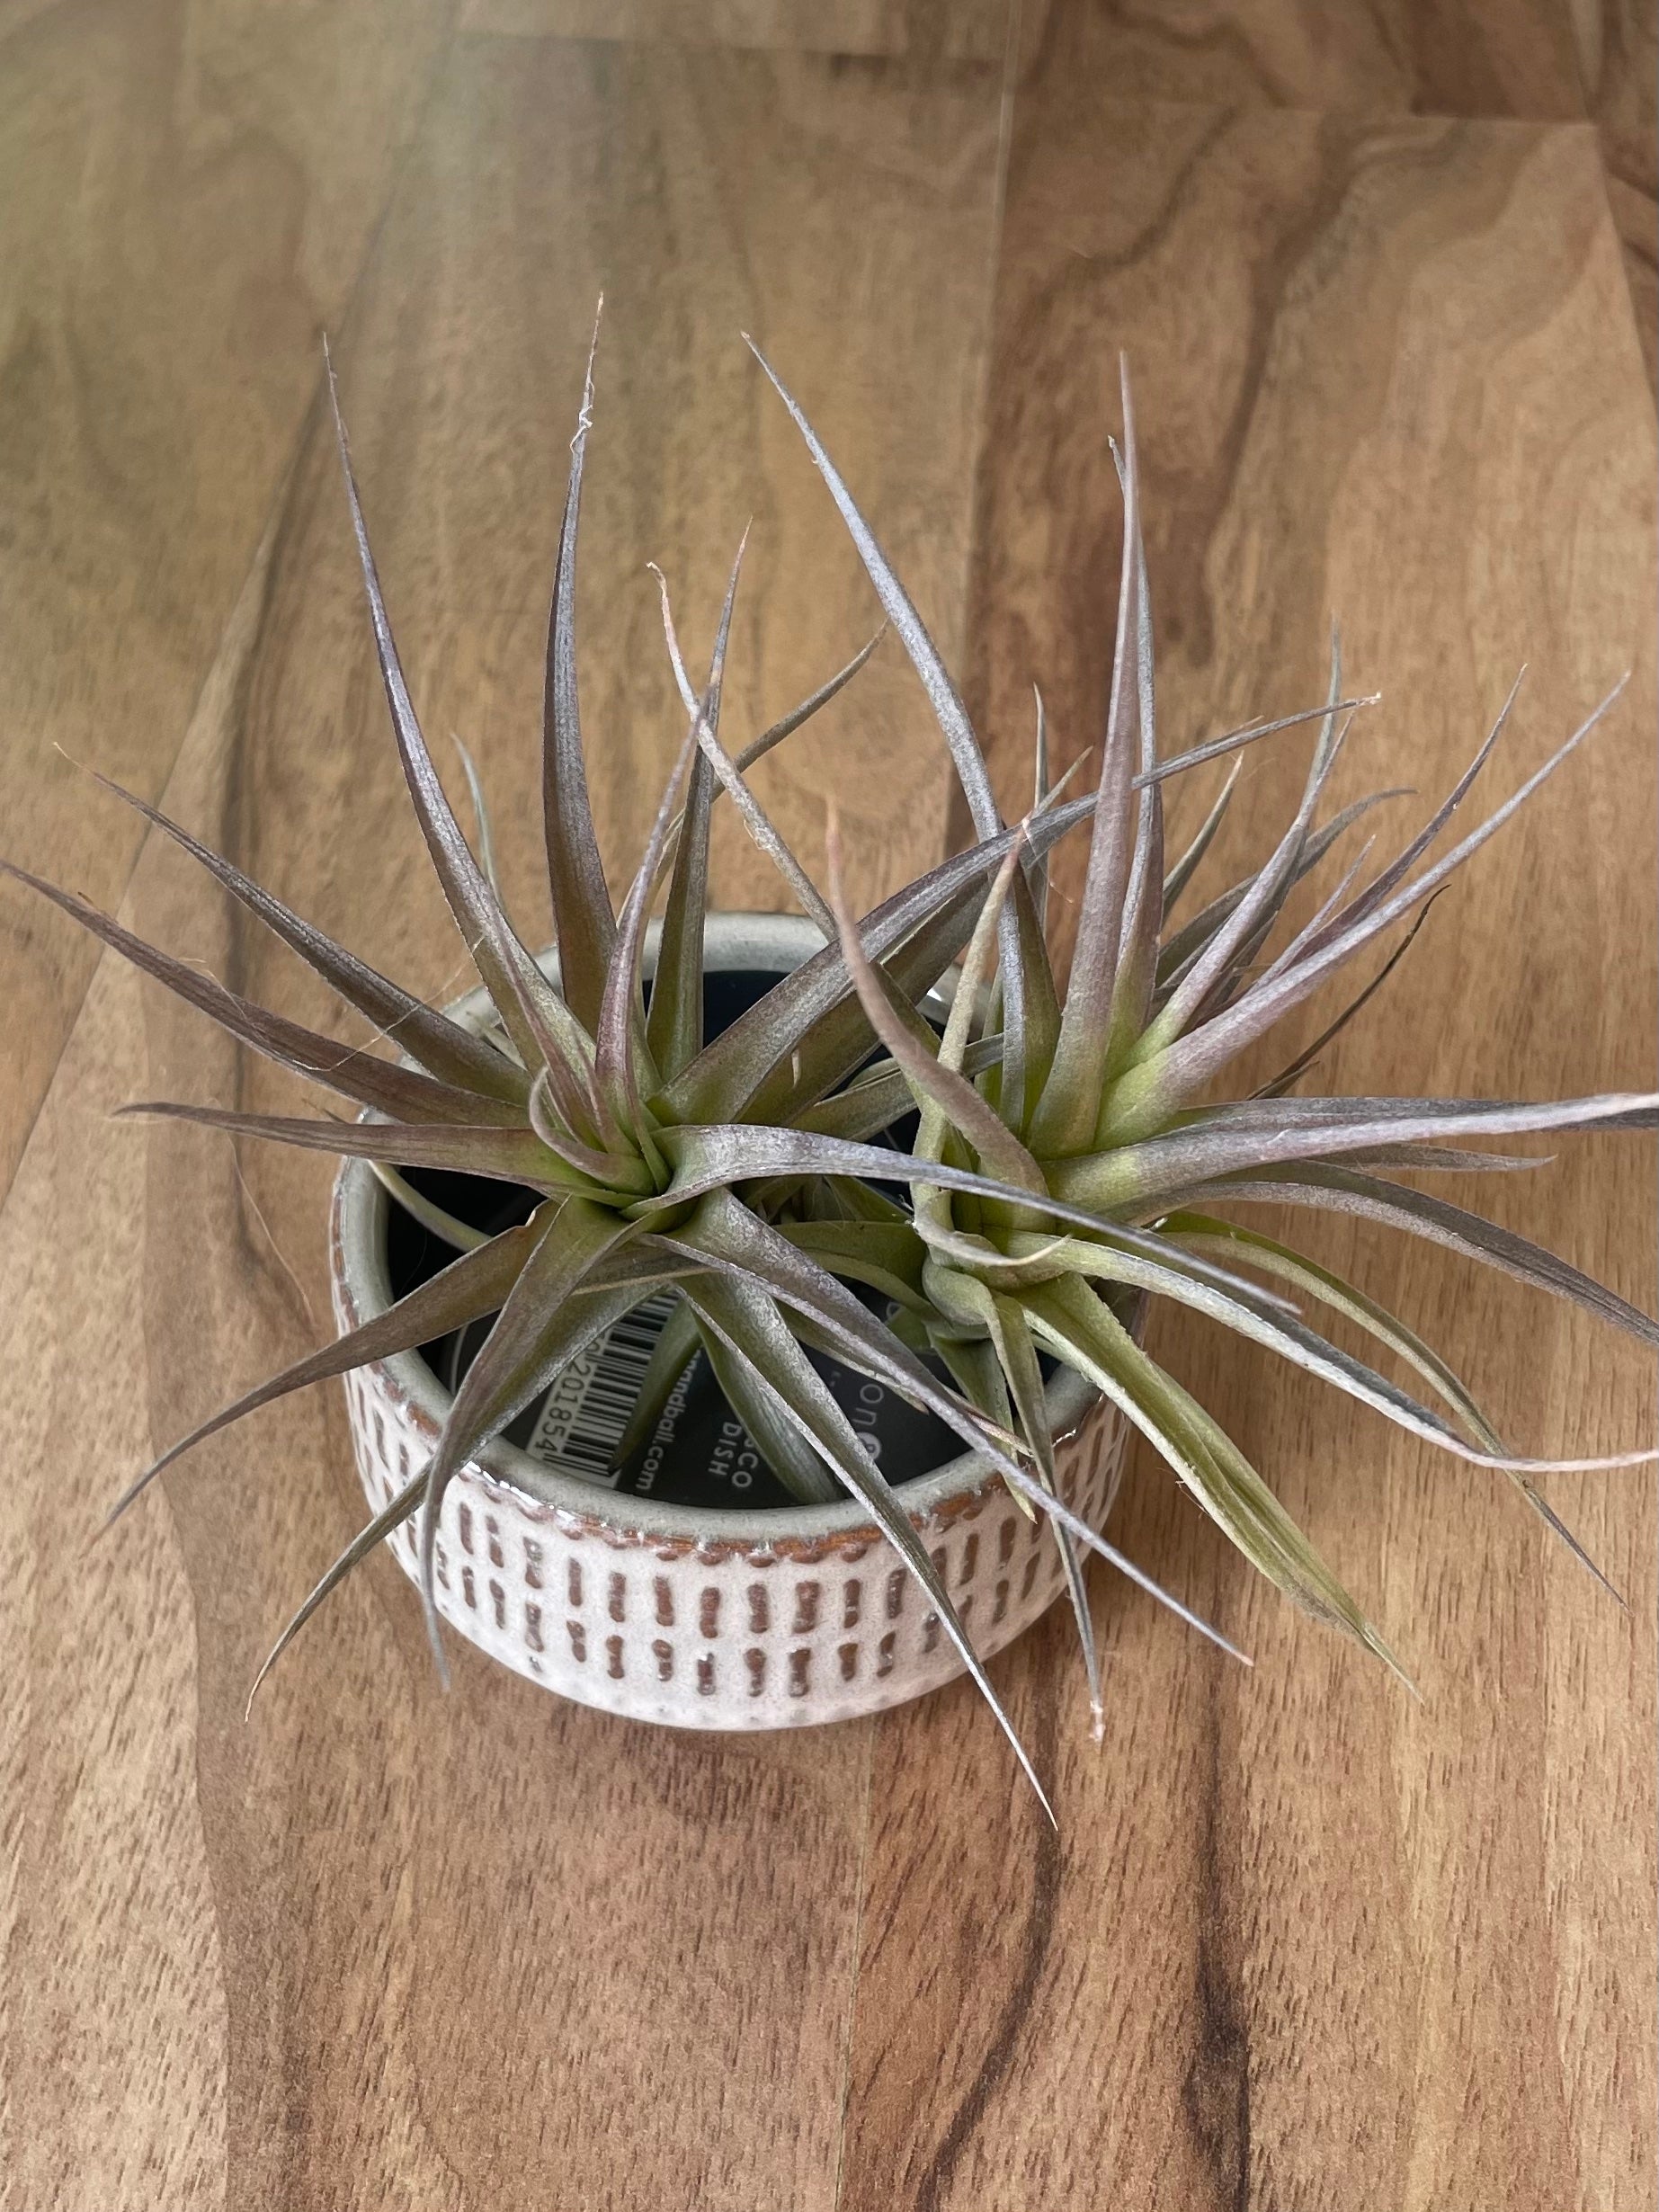 San Francisco Air Plant Dish with Airplants